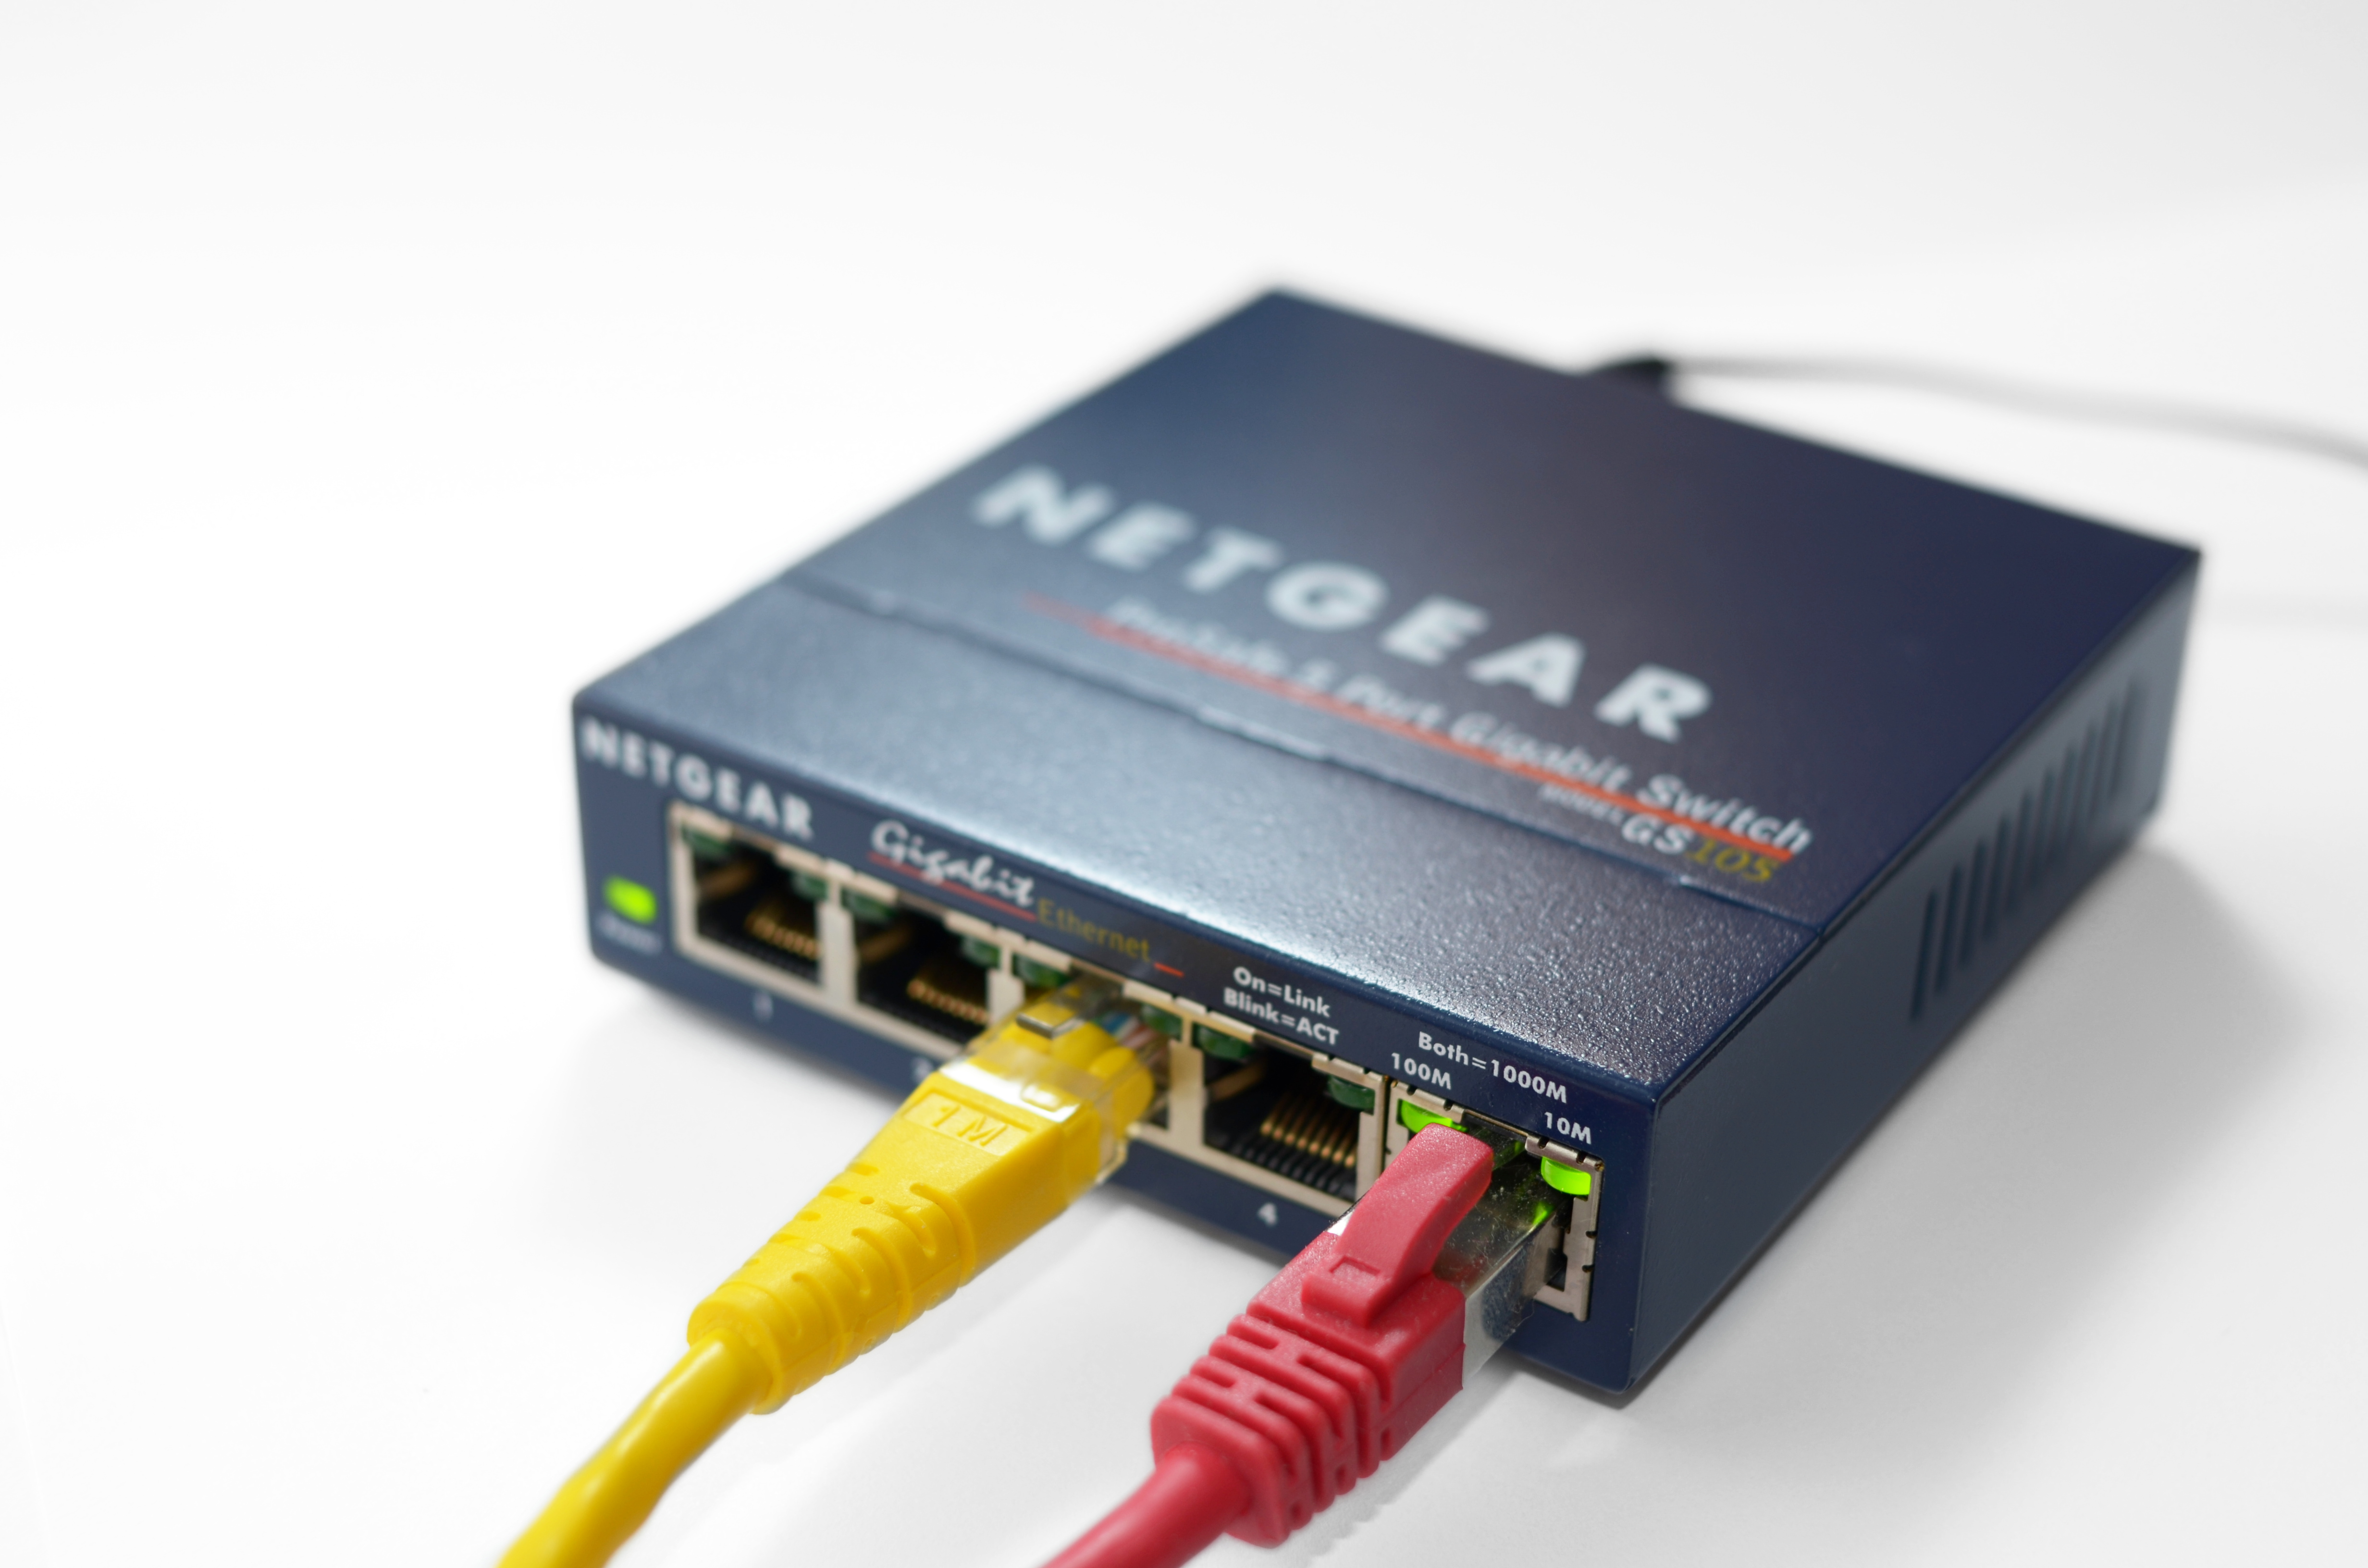 A photograph of an ethernet switch